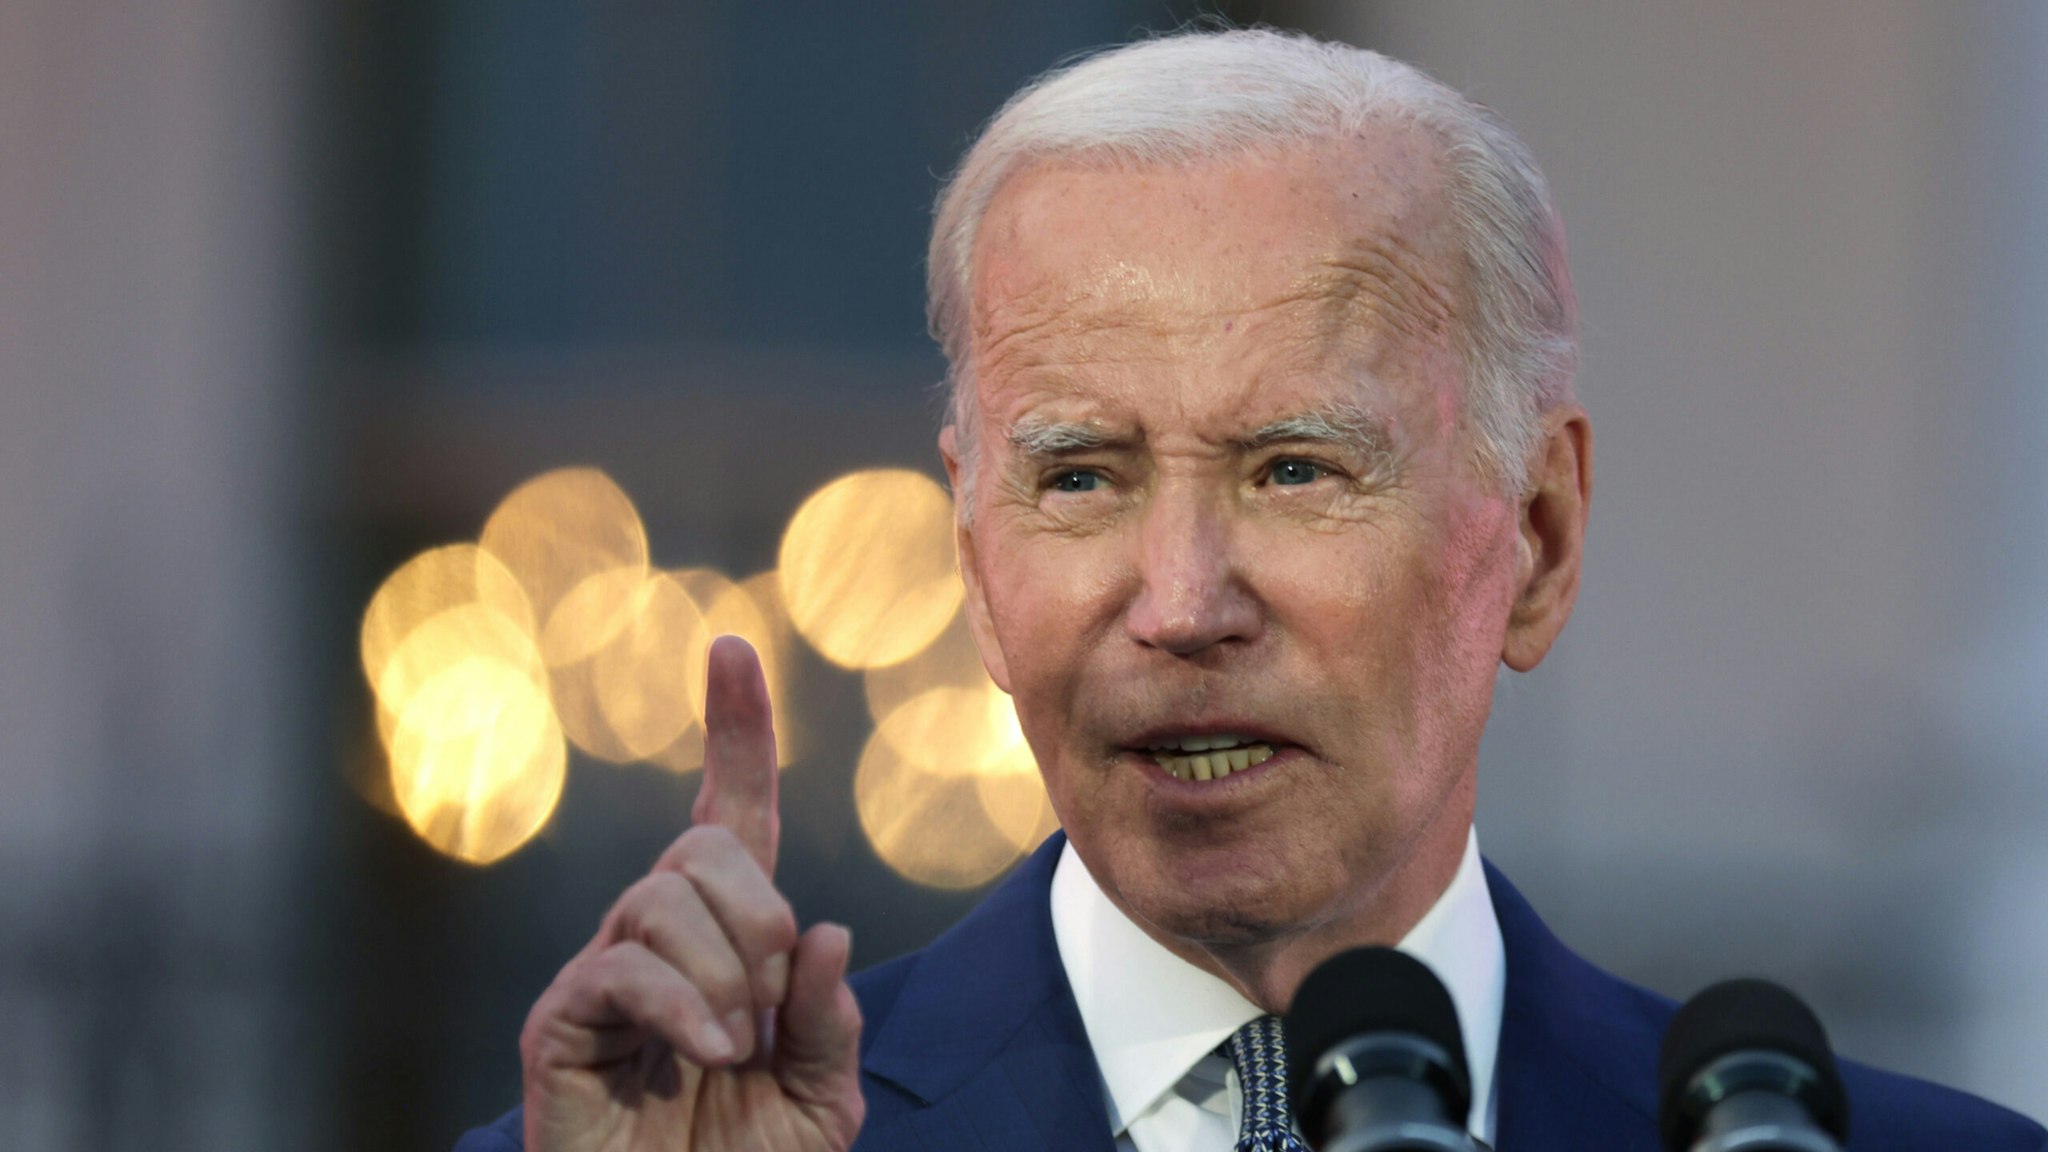 U.S. President Joe Biden speaks during a screening of the film “Flamin’ Hot” on the South Lawn of the White House on June 15, 2023 in Washington, DC.